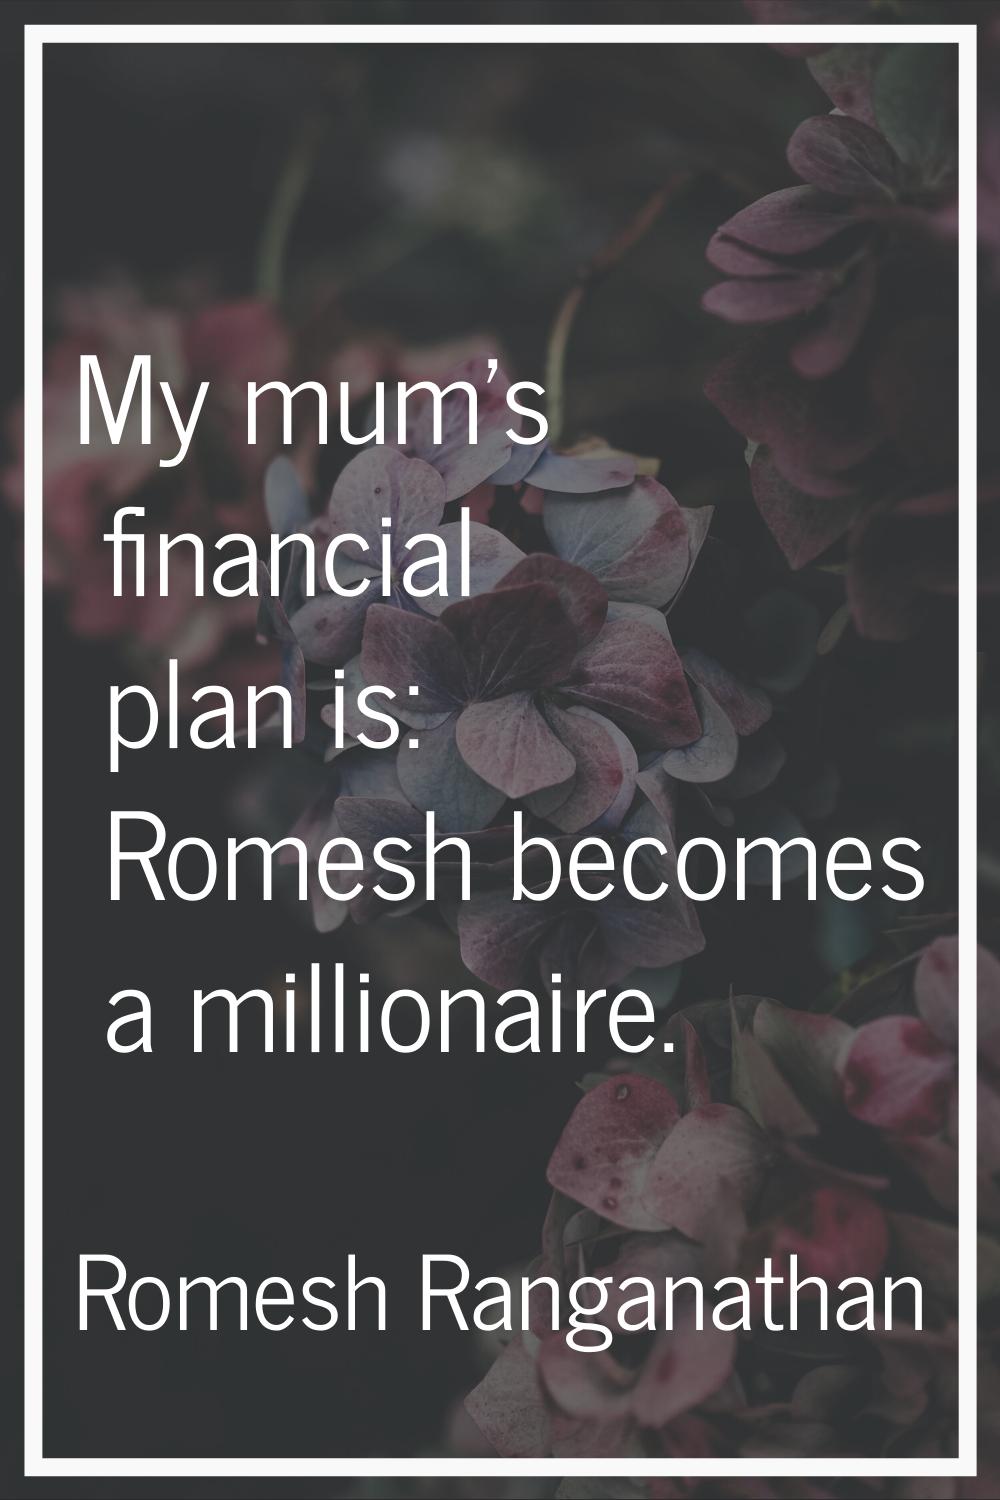 My mum's financial plan is: Romesh becomes a millionaire.